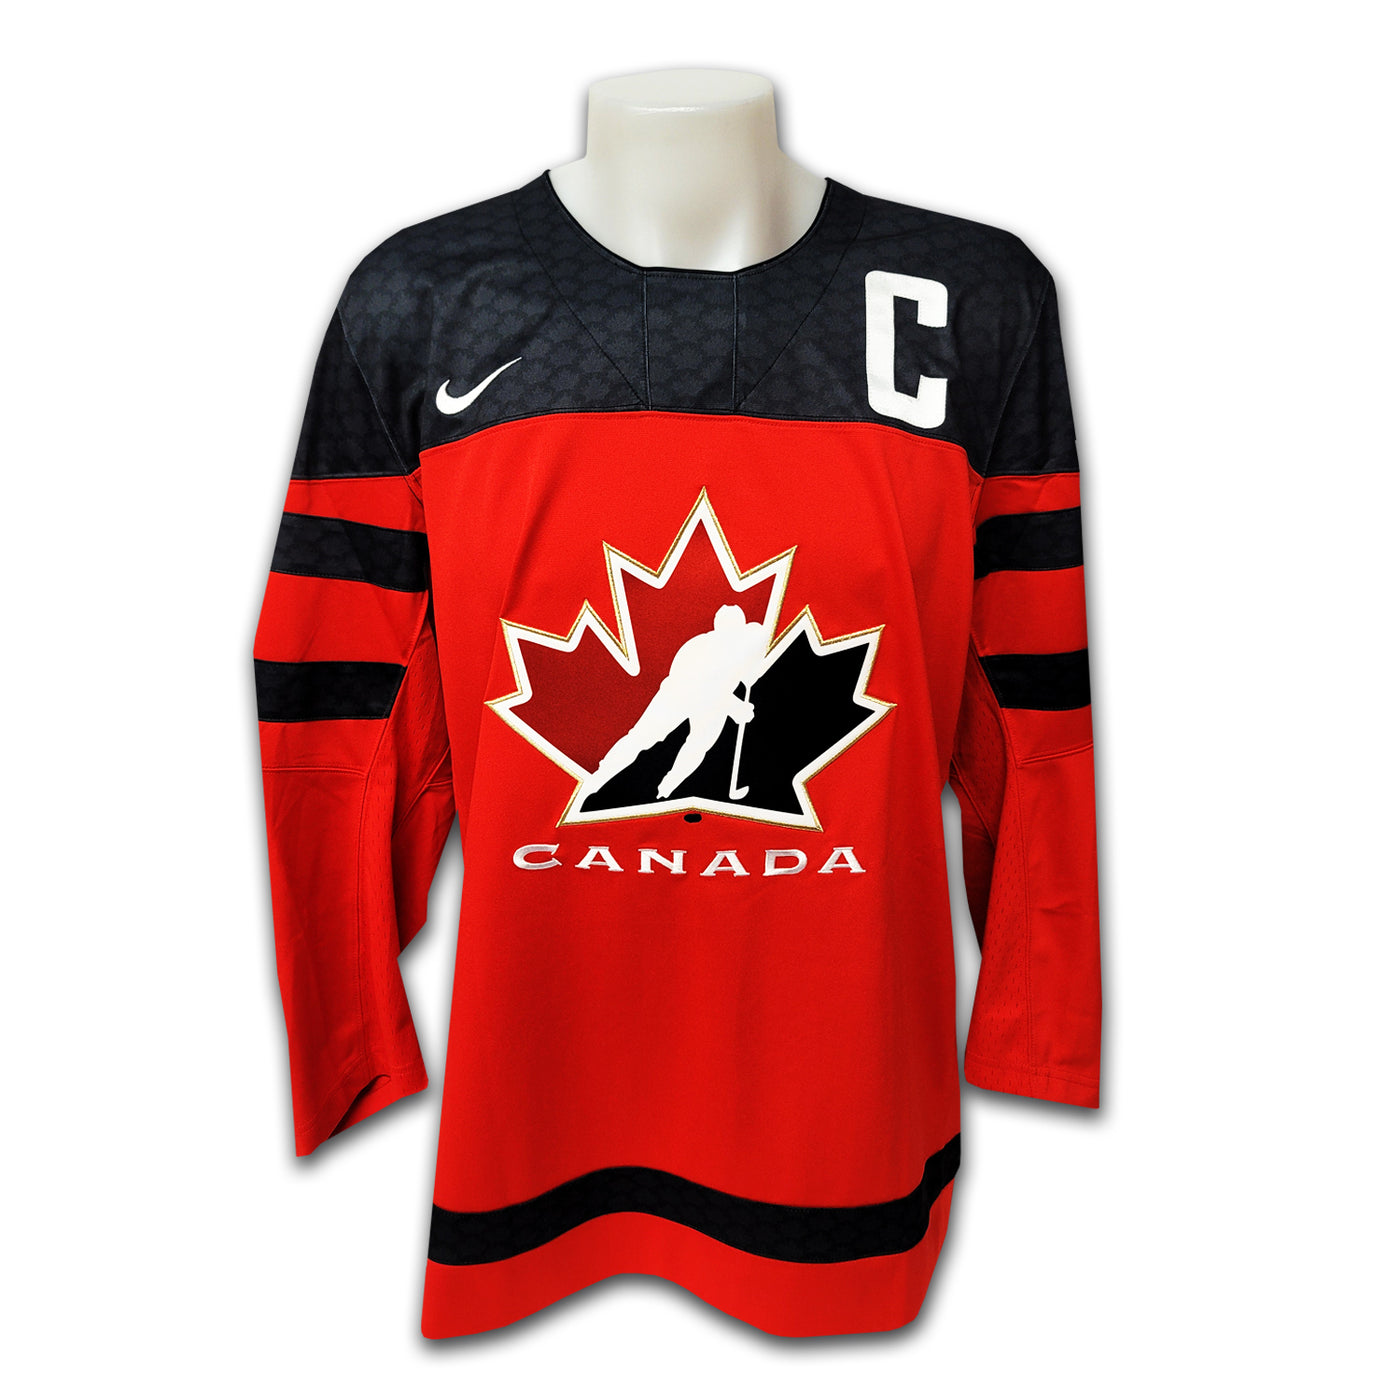 Dillon Dube 2018 Team Canada Red Nike Jersey